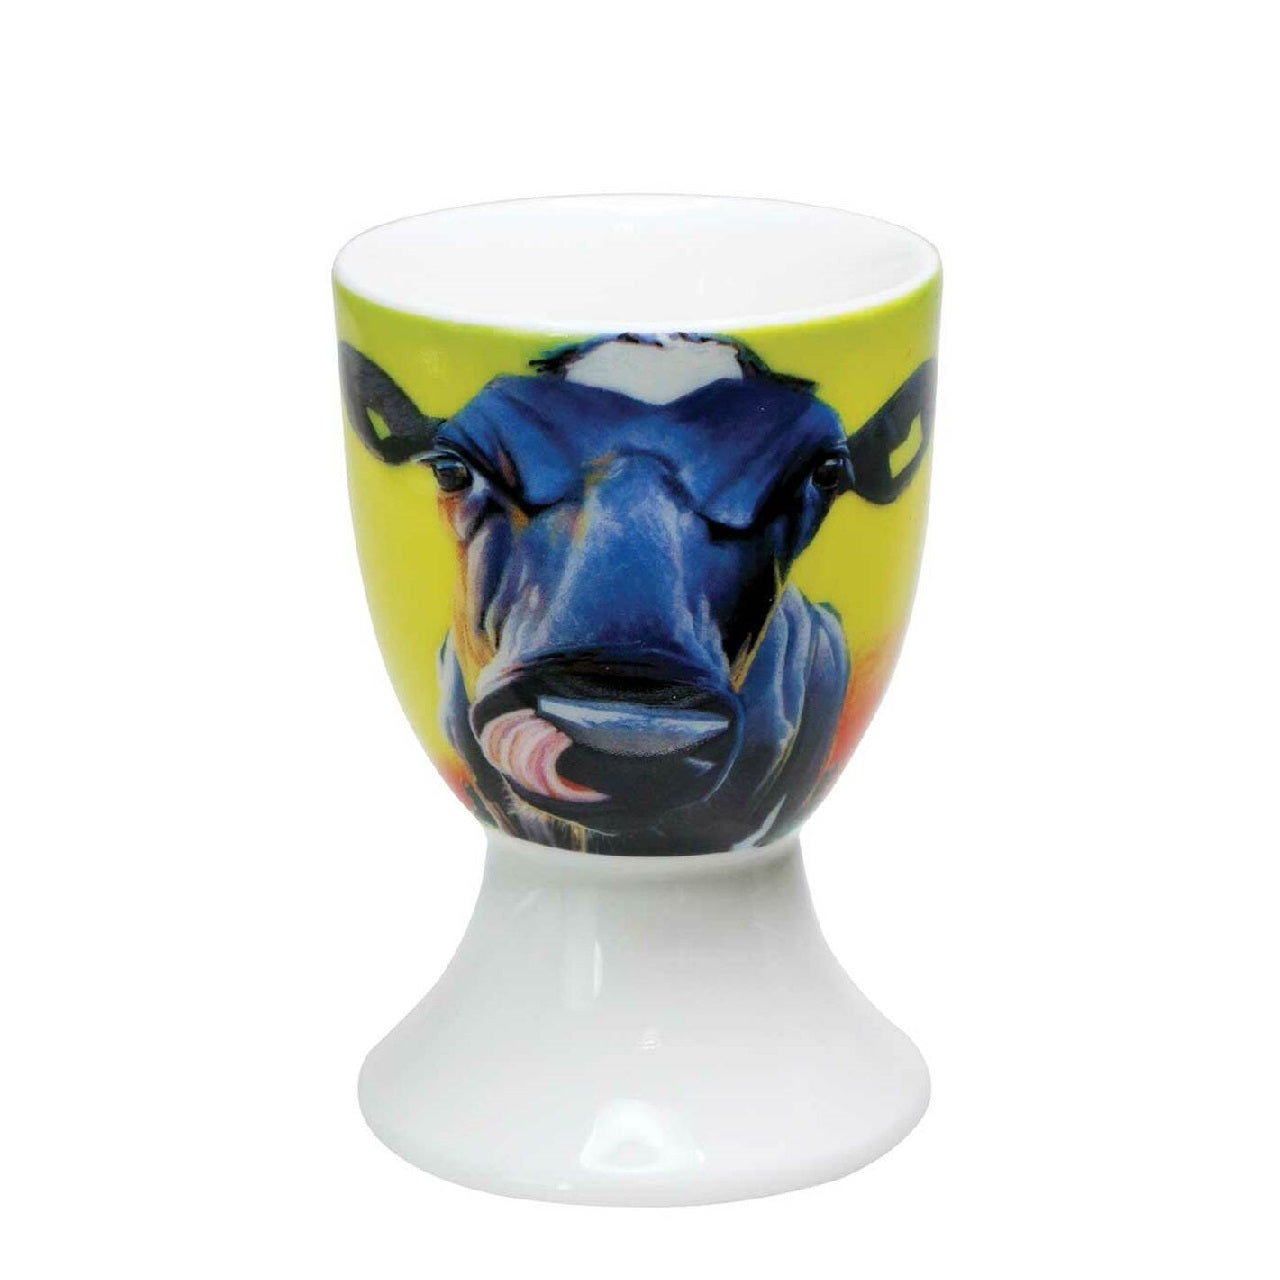 Eoin O'Connor Cow Egg Cup Set of Four  EOIN O’CONNOR’S eclectic style and striking use of colour makes his work instantly recognisable. While his command over scale and perspective is rooted in his architectural training, his passion remains firmly grounded in creating strikingly vibrant paintings which echo his unique view of Irish life.